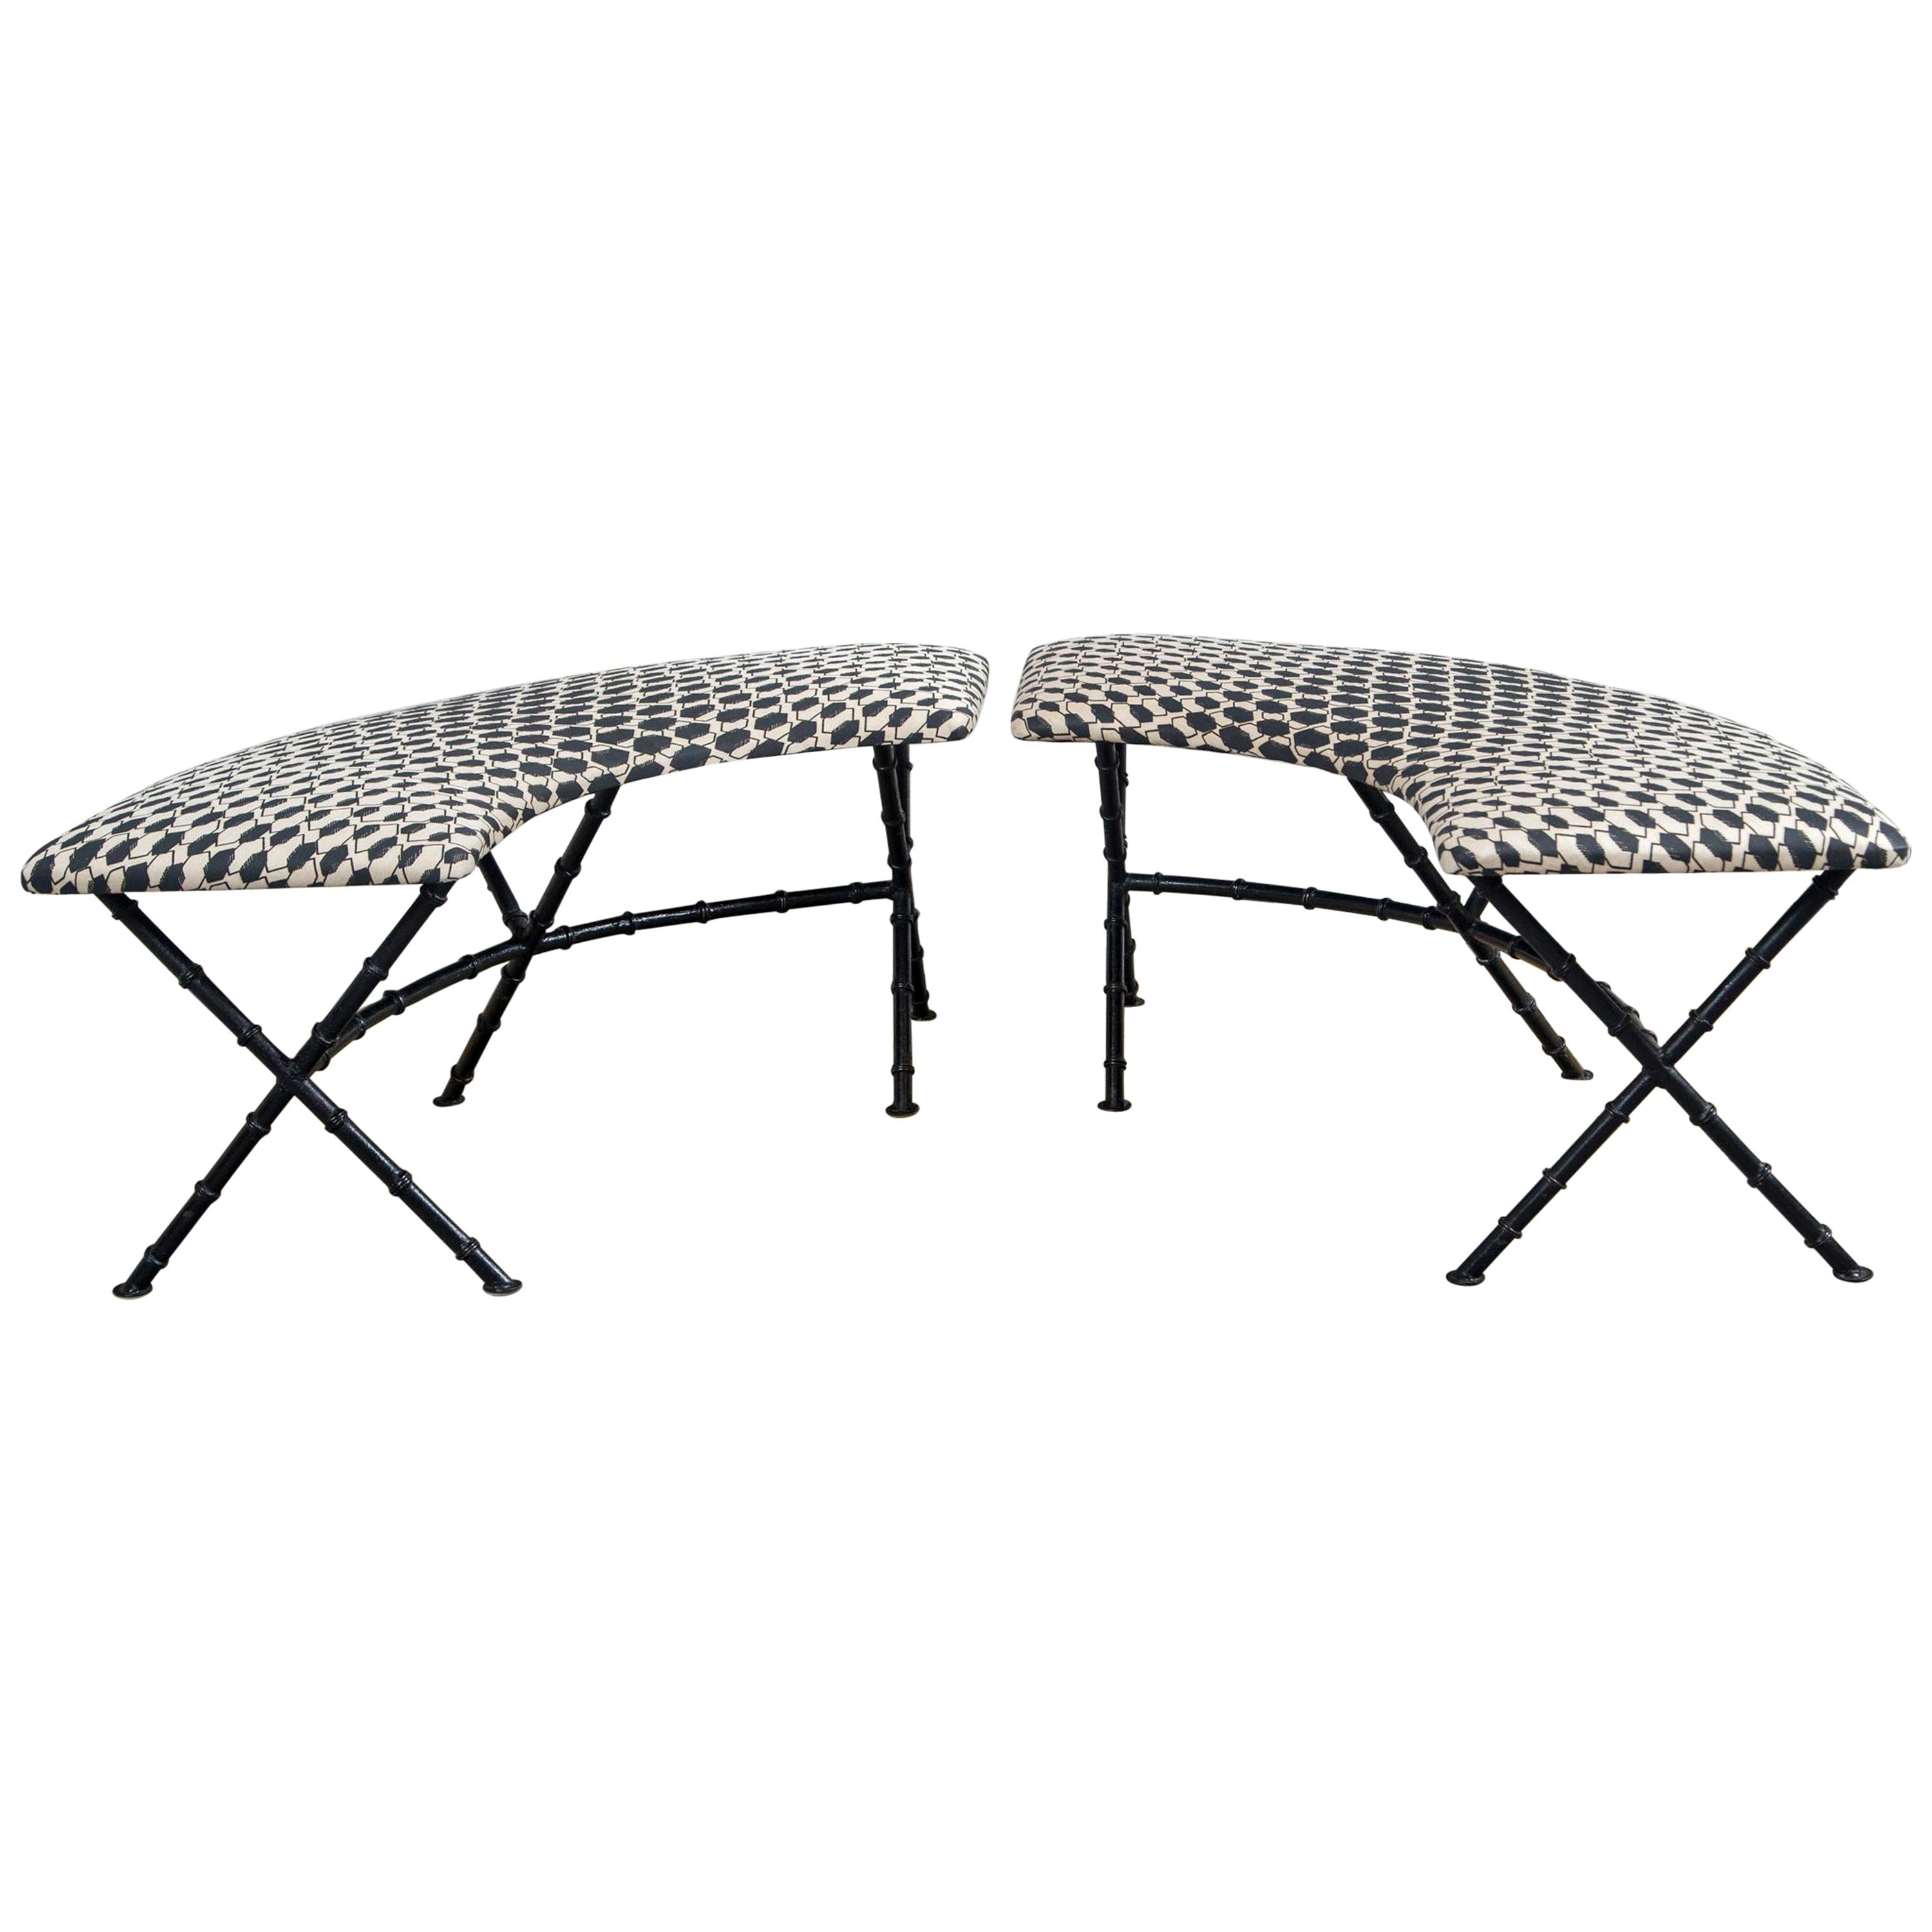 Pair of Black and White French Demilune Iron Benches Recovered in Fortuny Fabric